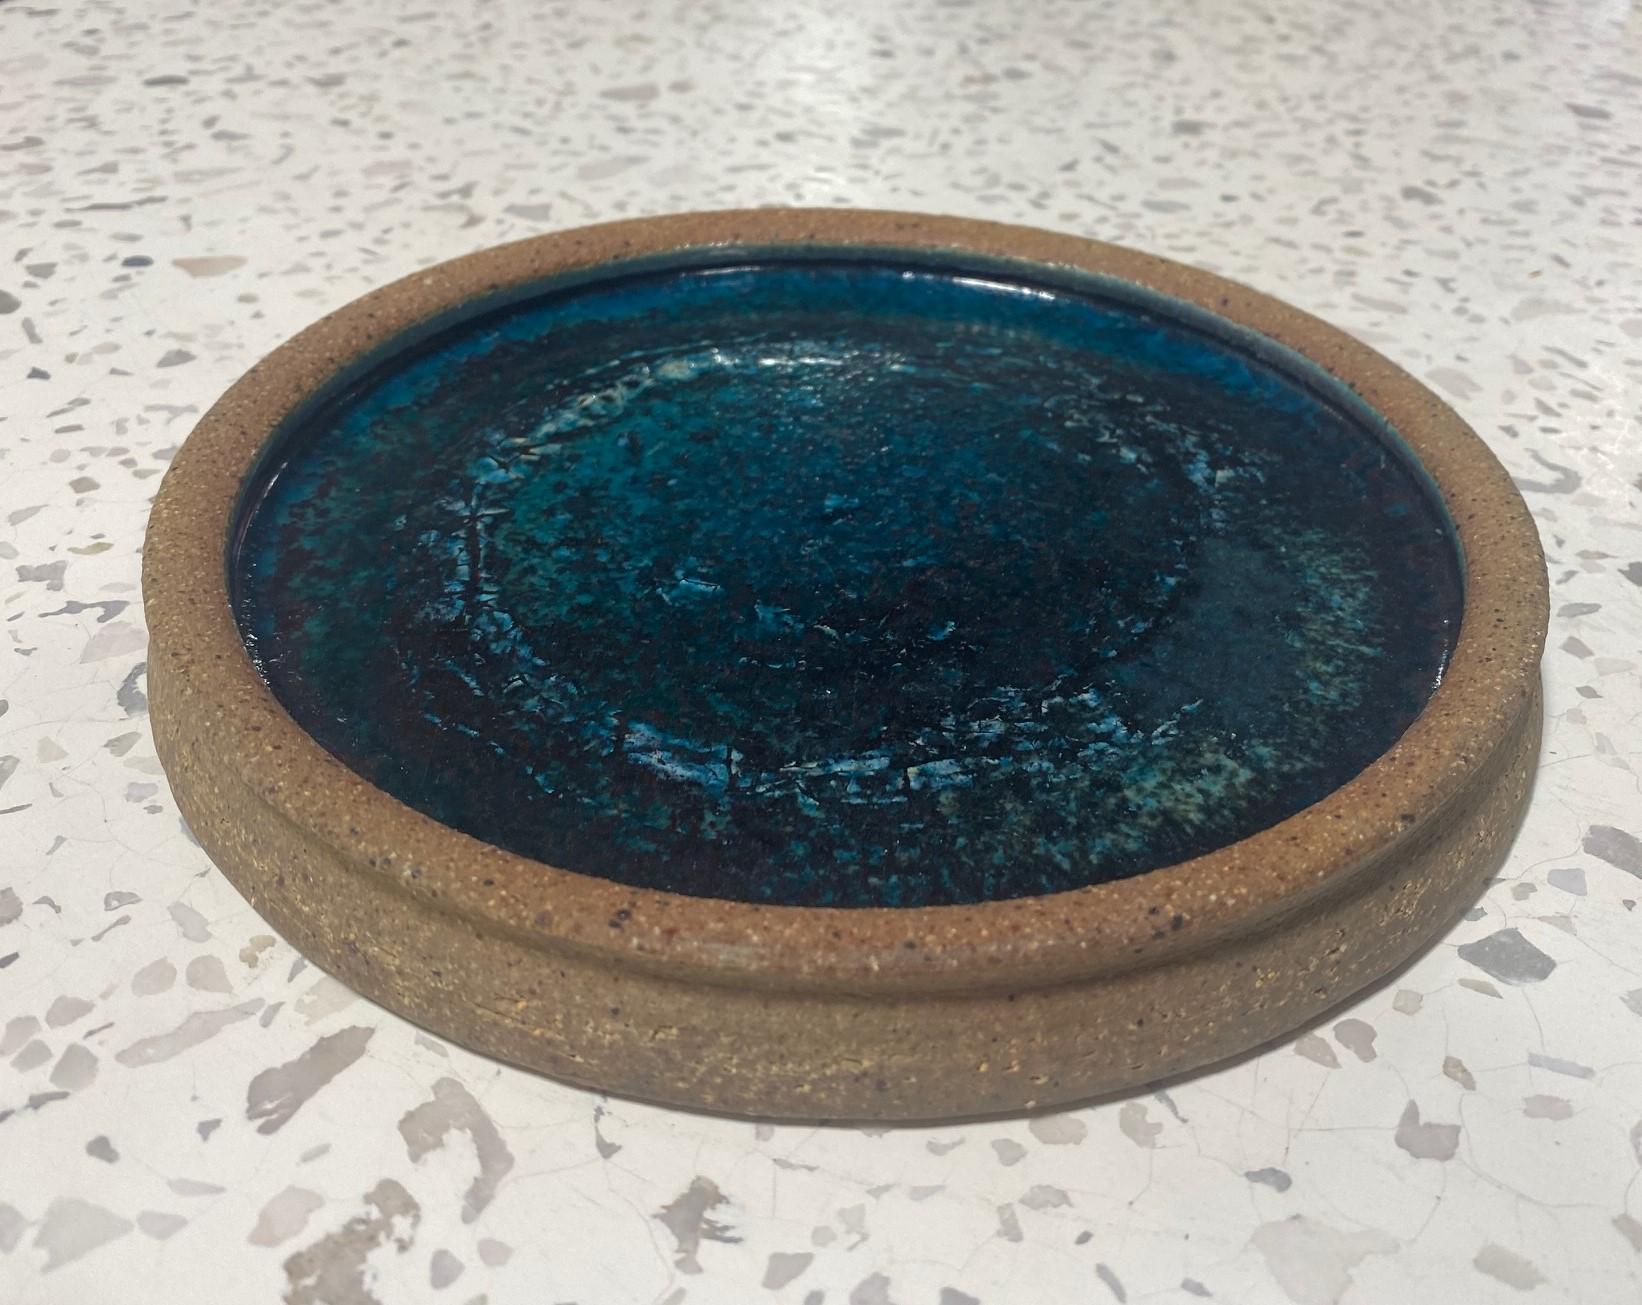 A wonderful work by East Coast/ Massachusetts master potter William Wymann. This piece features a fantastic texture and rich, sumptuous, deep ocean-like blue crackle glaze that changes shades and colors depending on the light. It absolutely